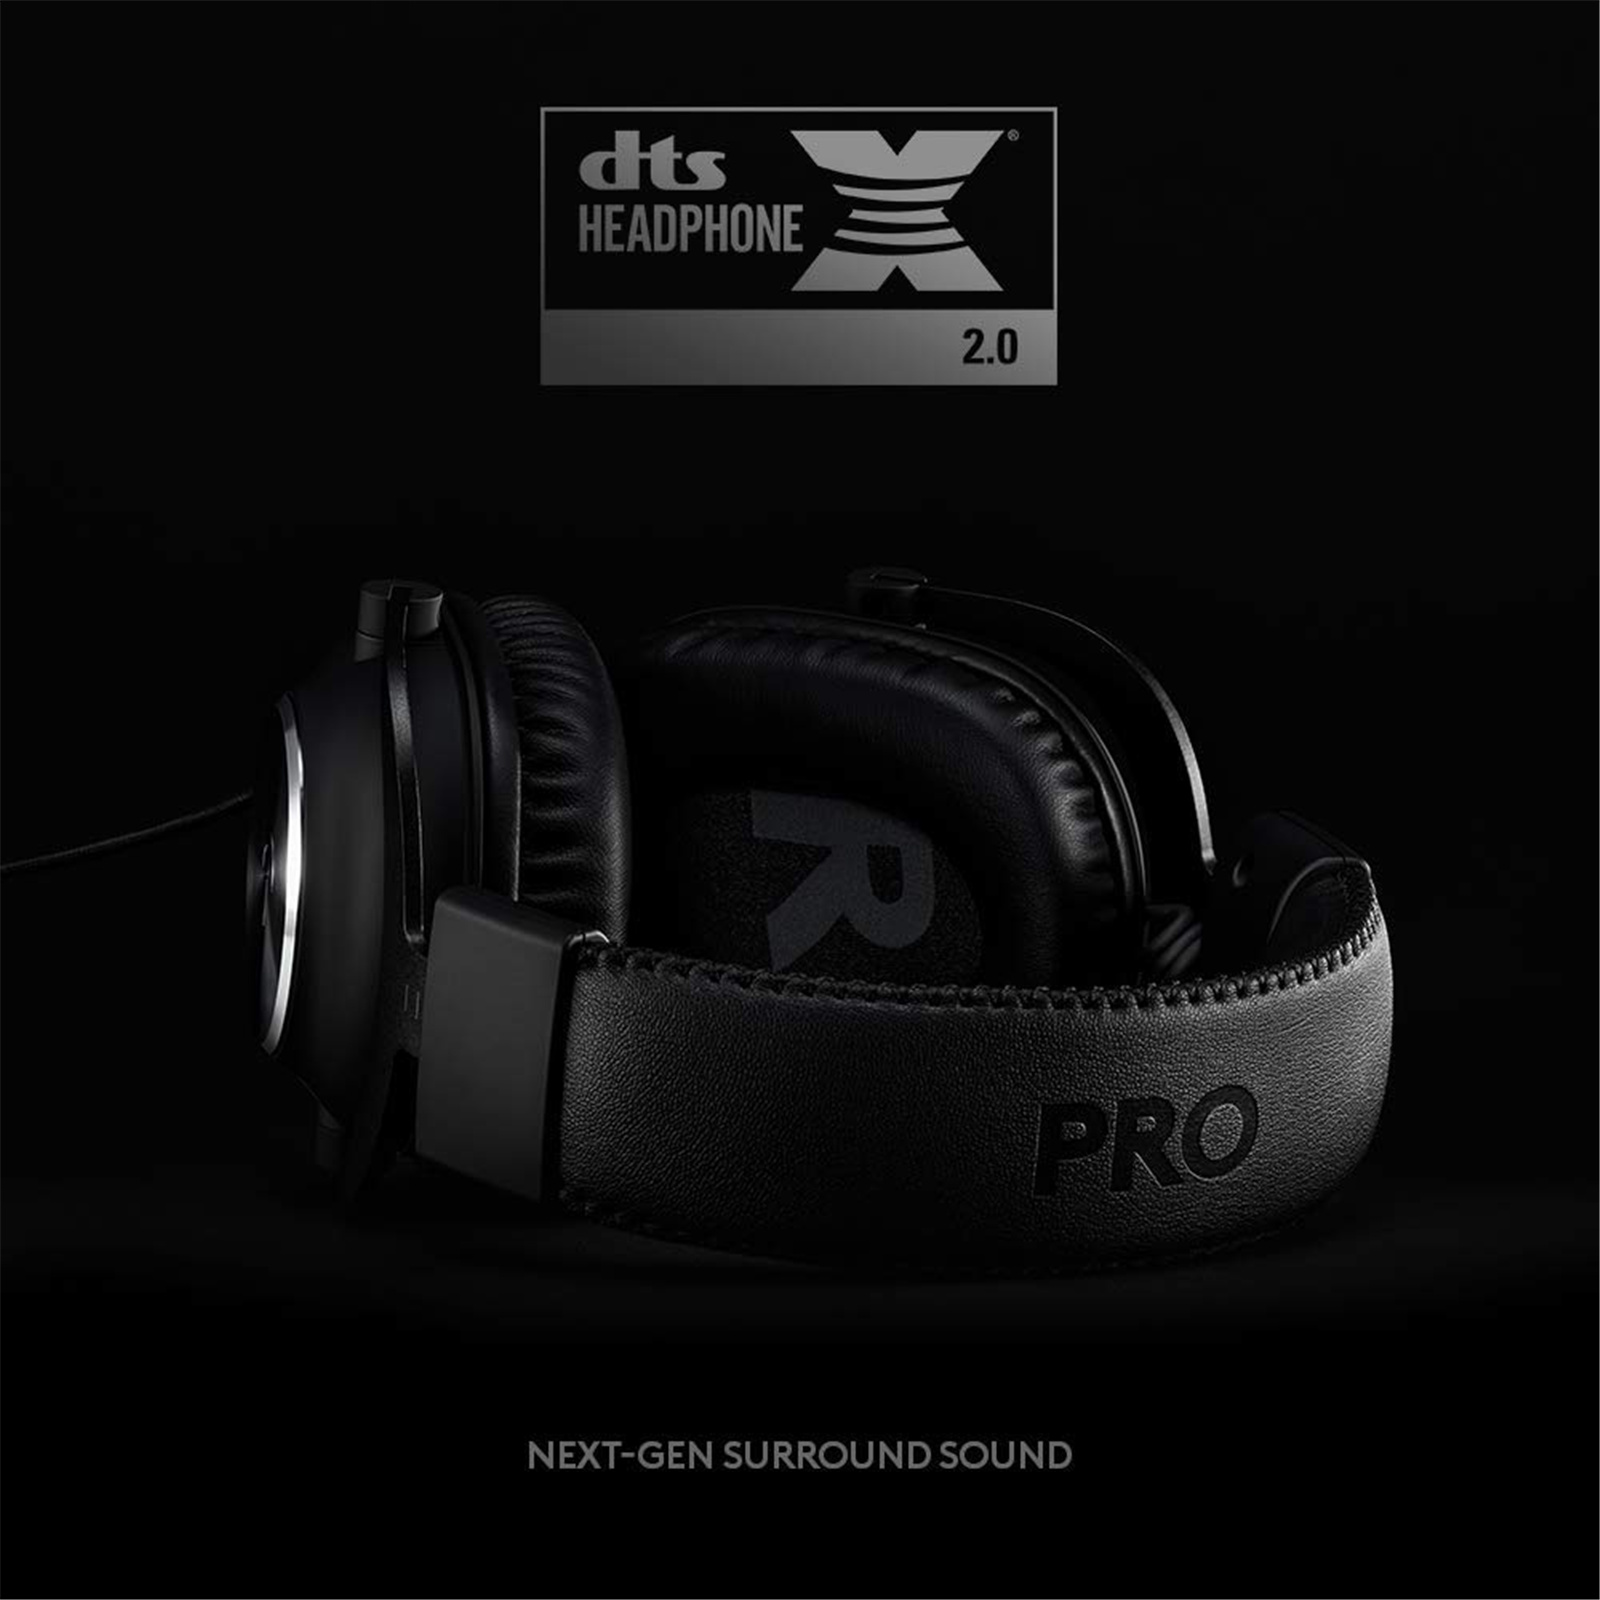 Buy the Logitech Pro X Gaming Headset DTS Headphone - Blue Voice (  981-000820 ) online - PBTech.com/pacific